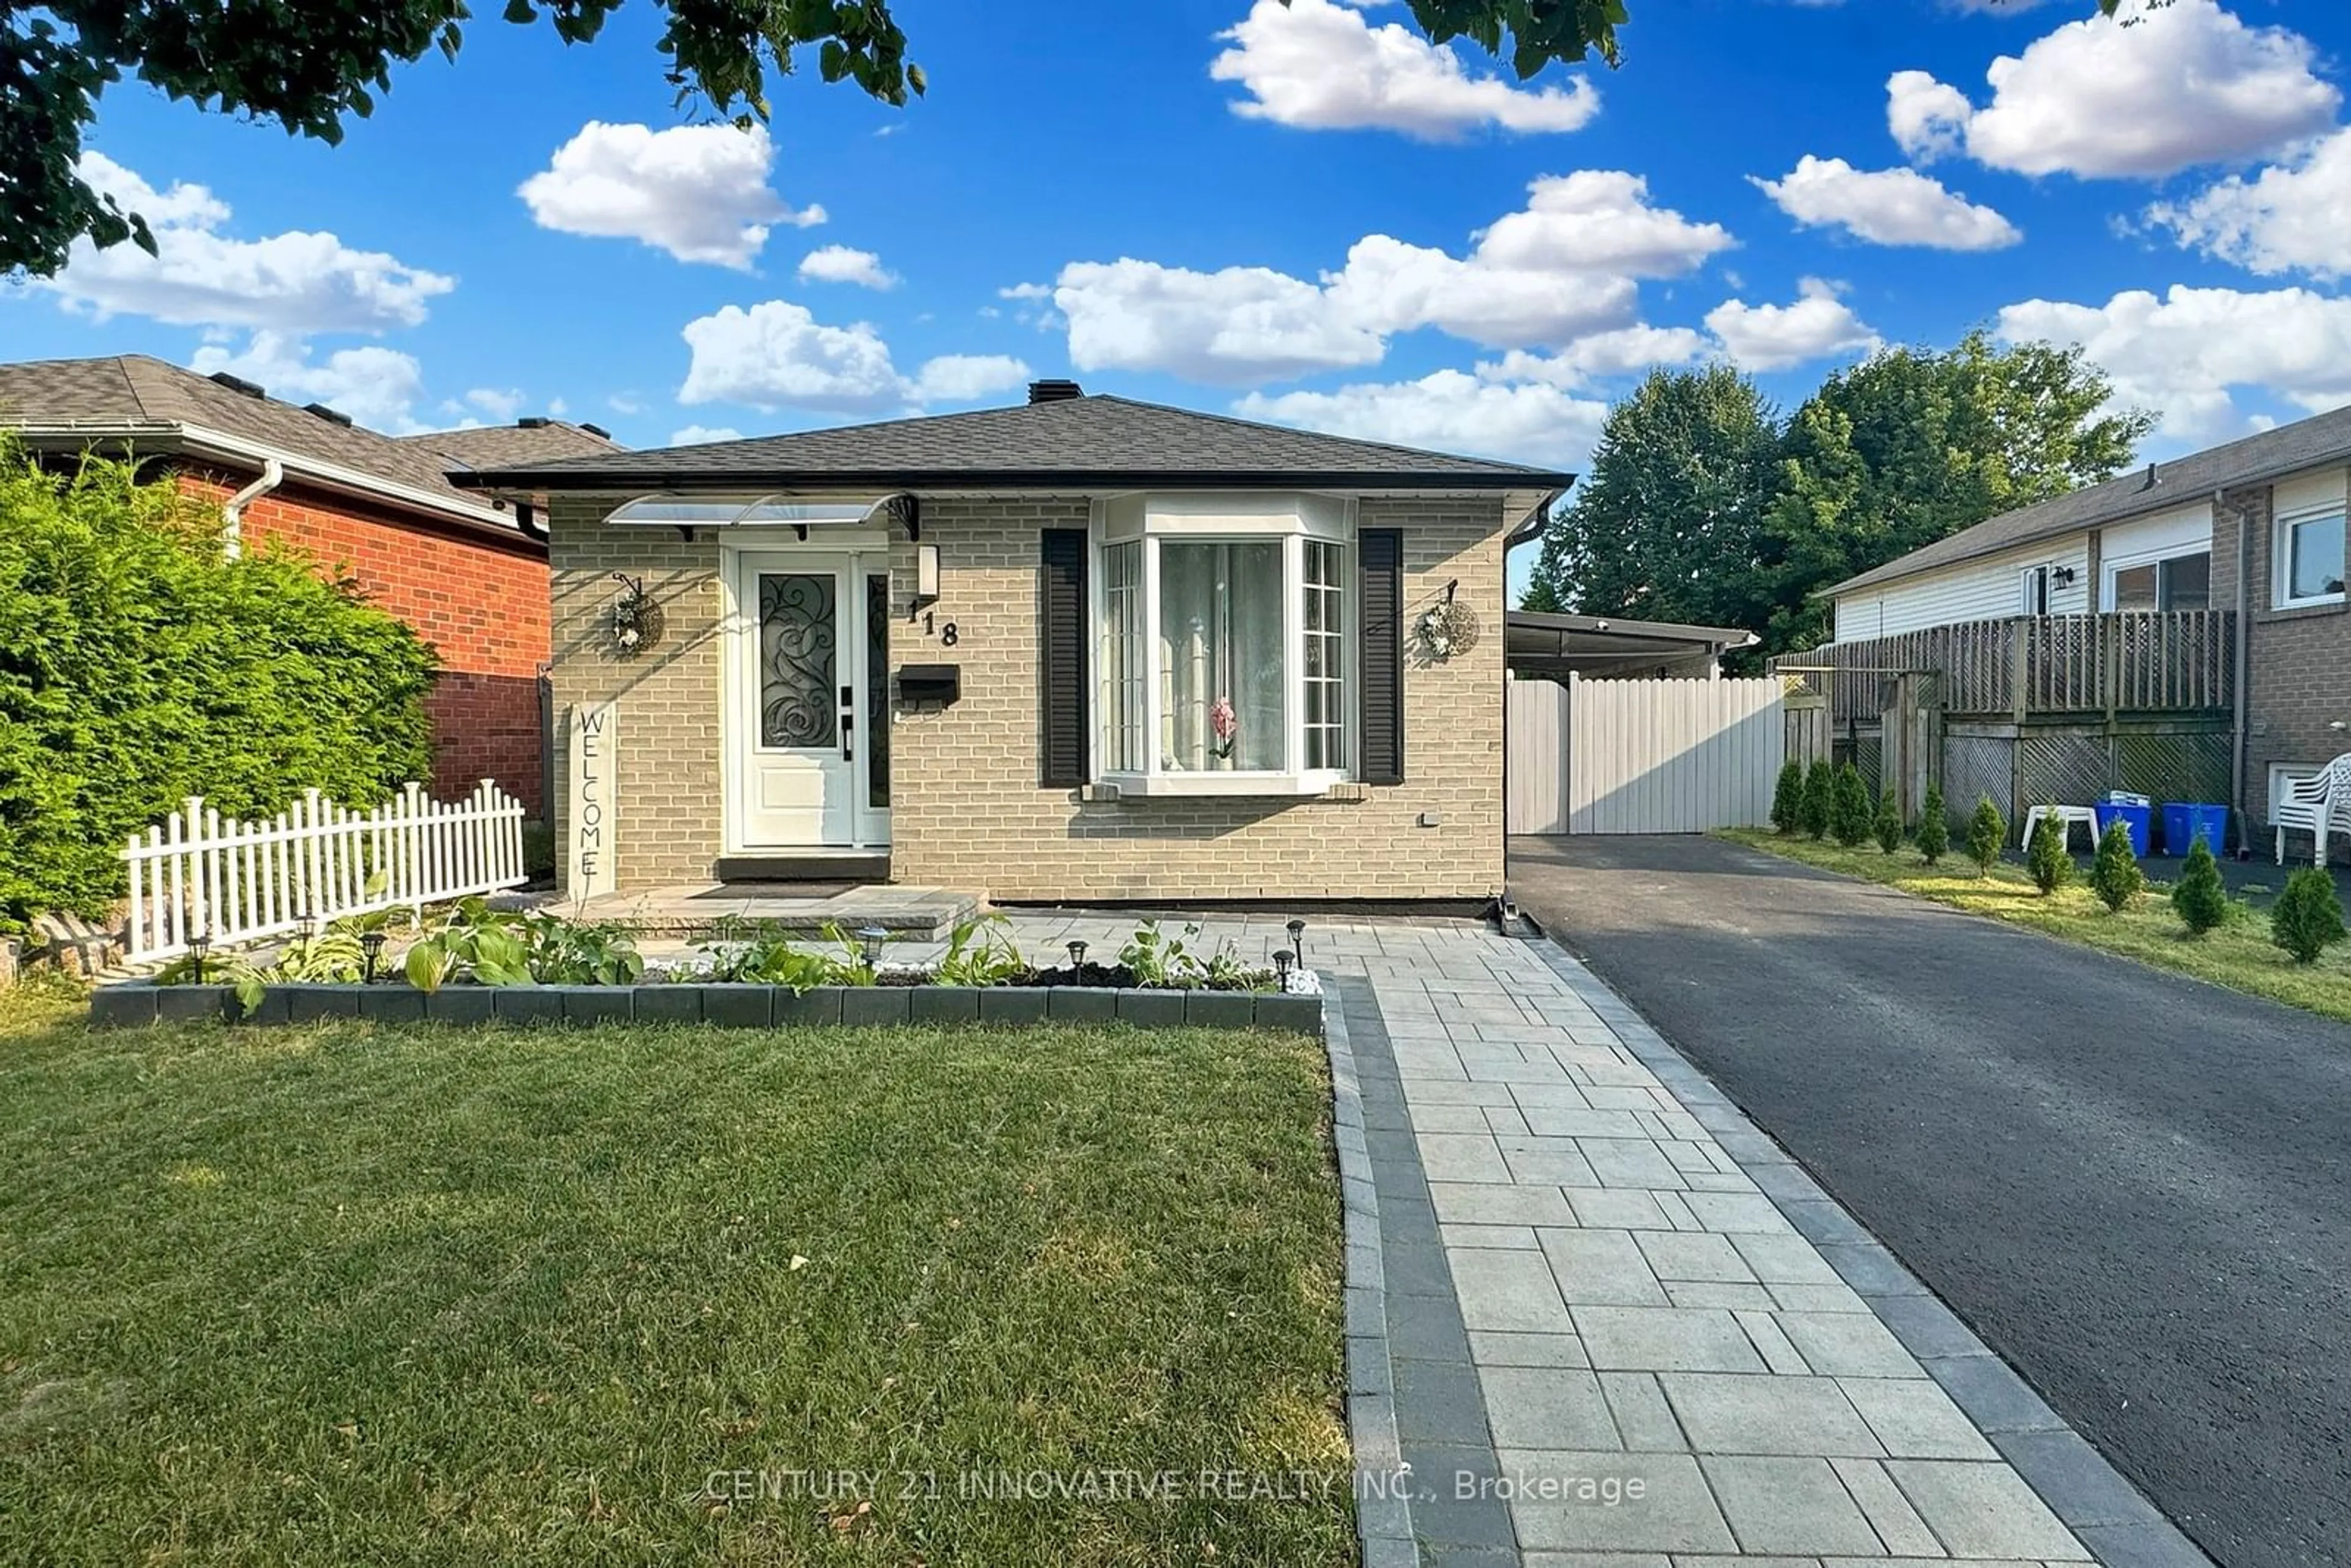 Home with brick exterior material for 118 Homefield Sq, Clarington Ontario L1E 1K9